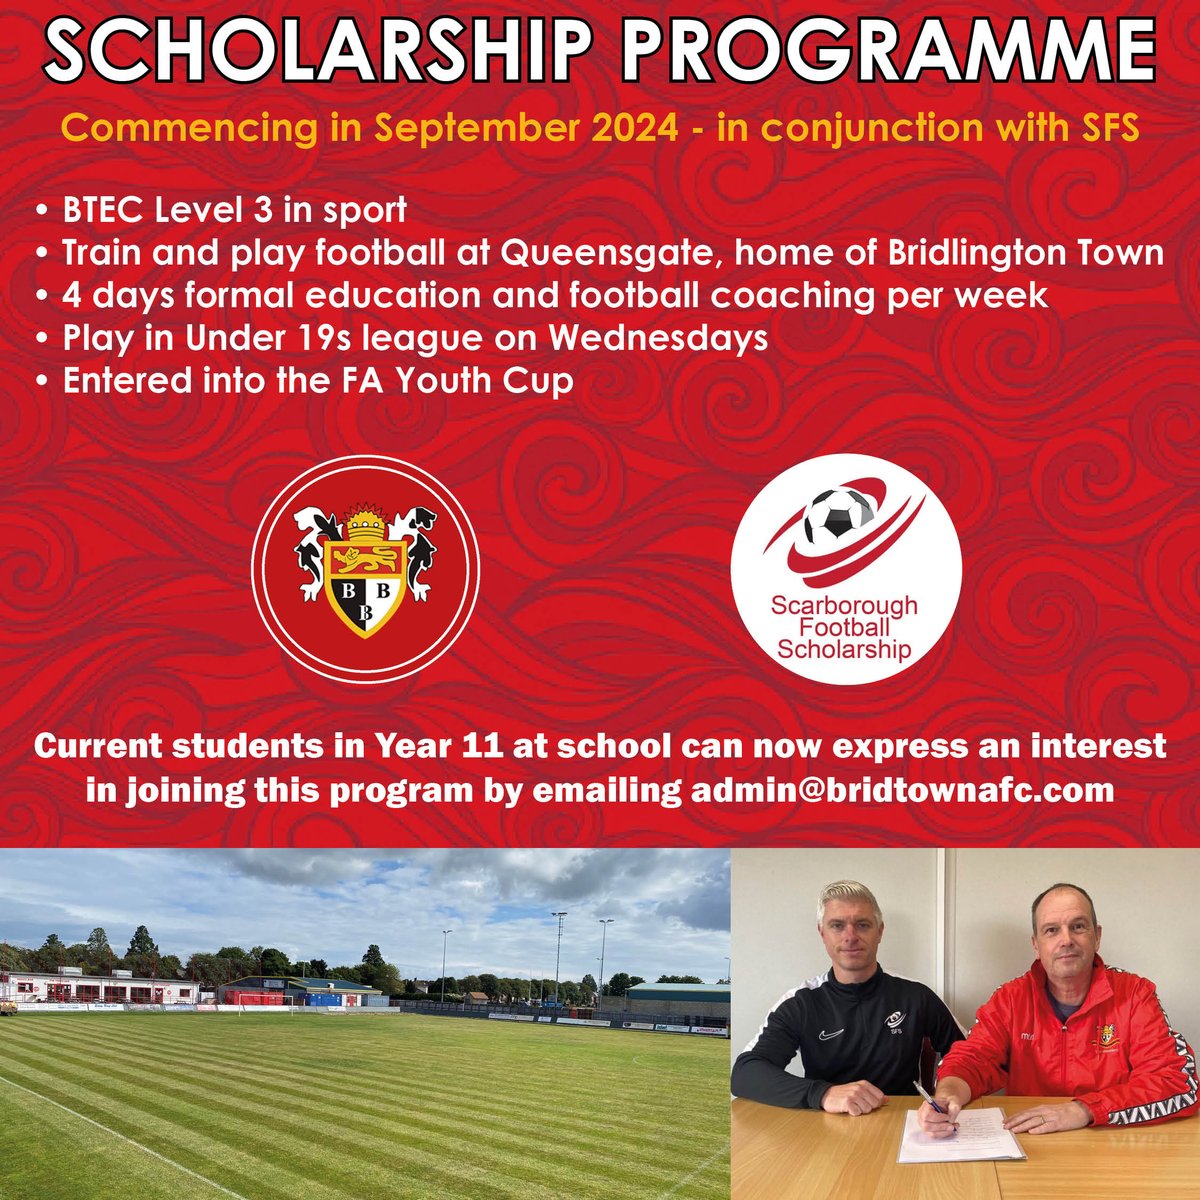 SCHOLARSHIP PROGRAMME We are delighted to be commencing our scholarship programme in September 2024 in conjunction with SFS - a Scarborough based education provider. Full details available here: bridtownafc.com/football-schol… Please email admin@bridtownafc.com to express an interest.